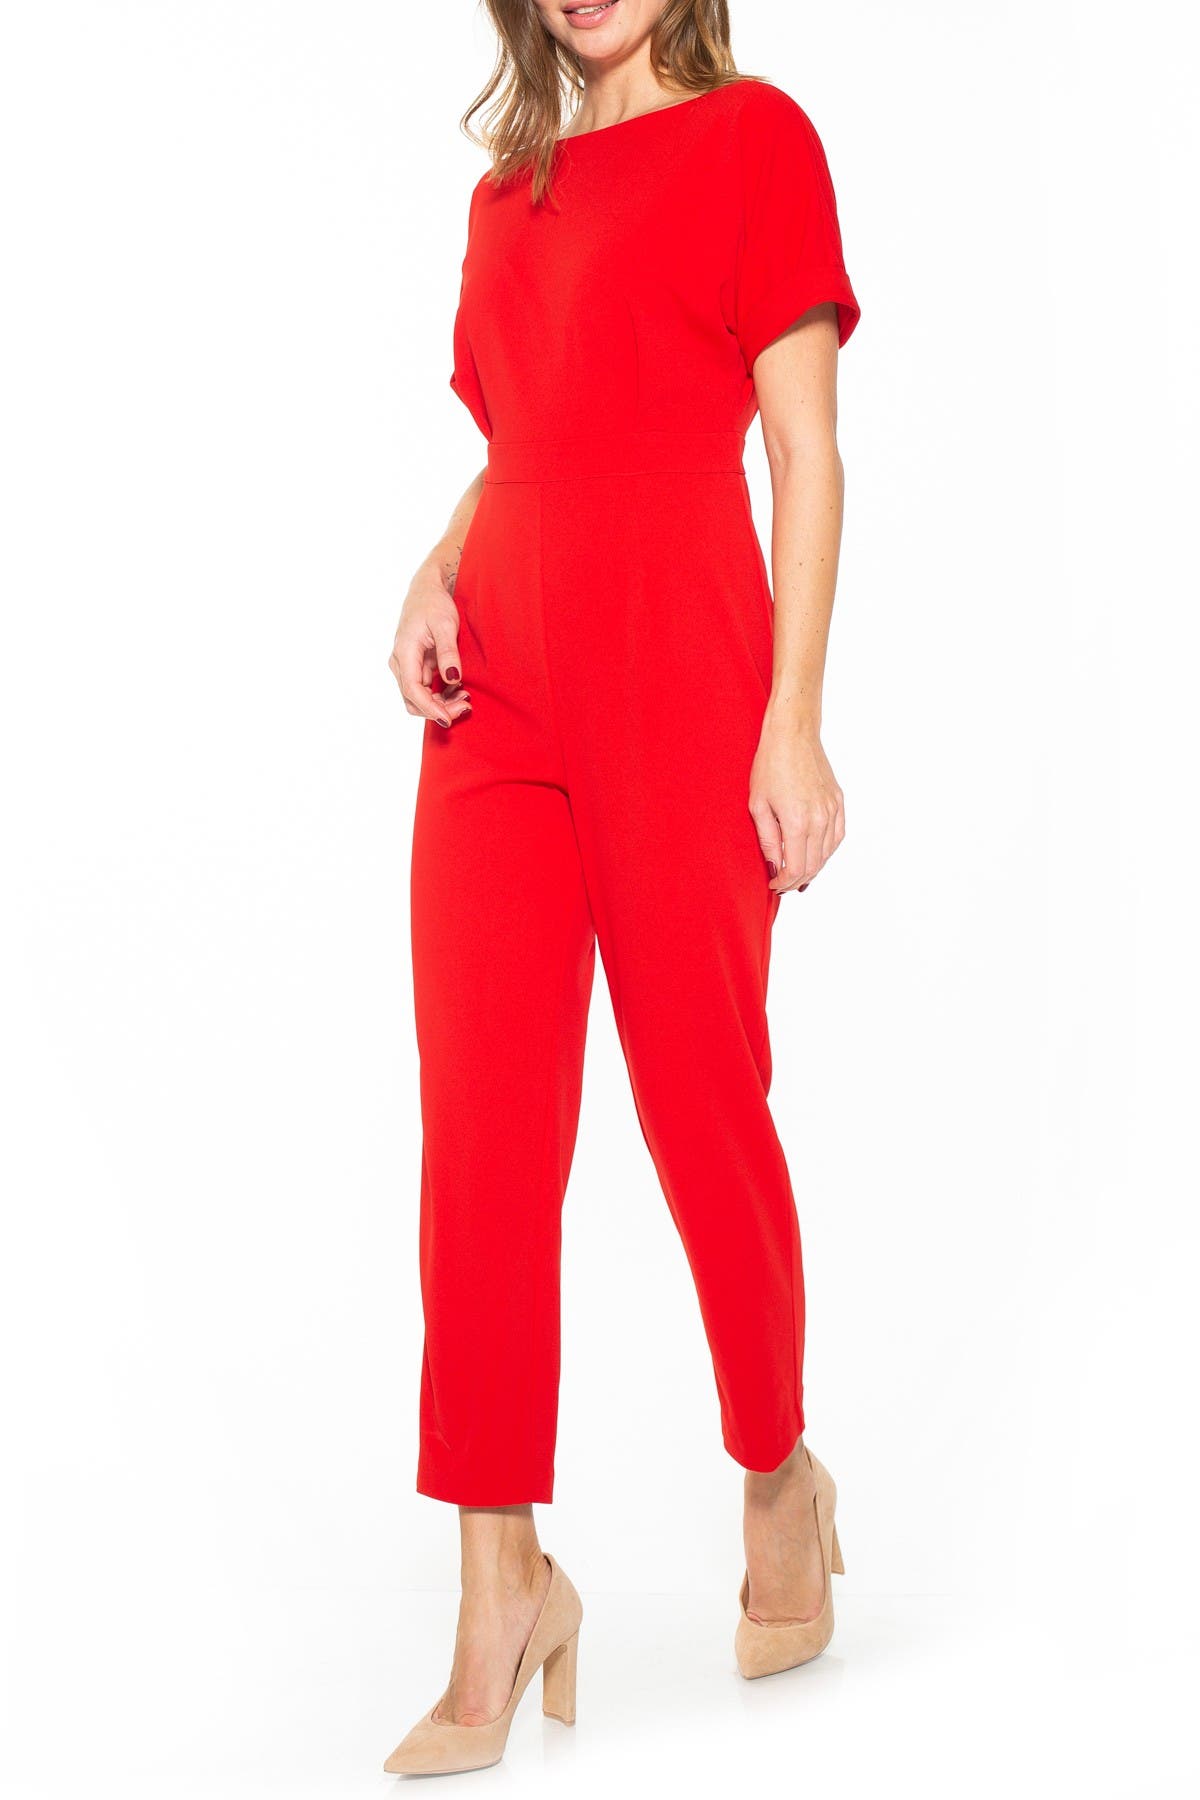 Alexia Admor Women's Draped One-shoulder Jumpsuit In Red | ModeSens